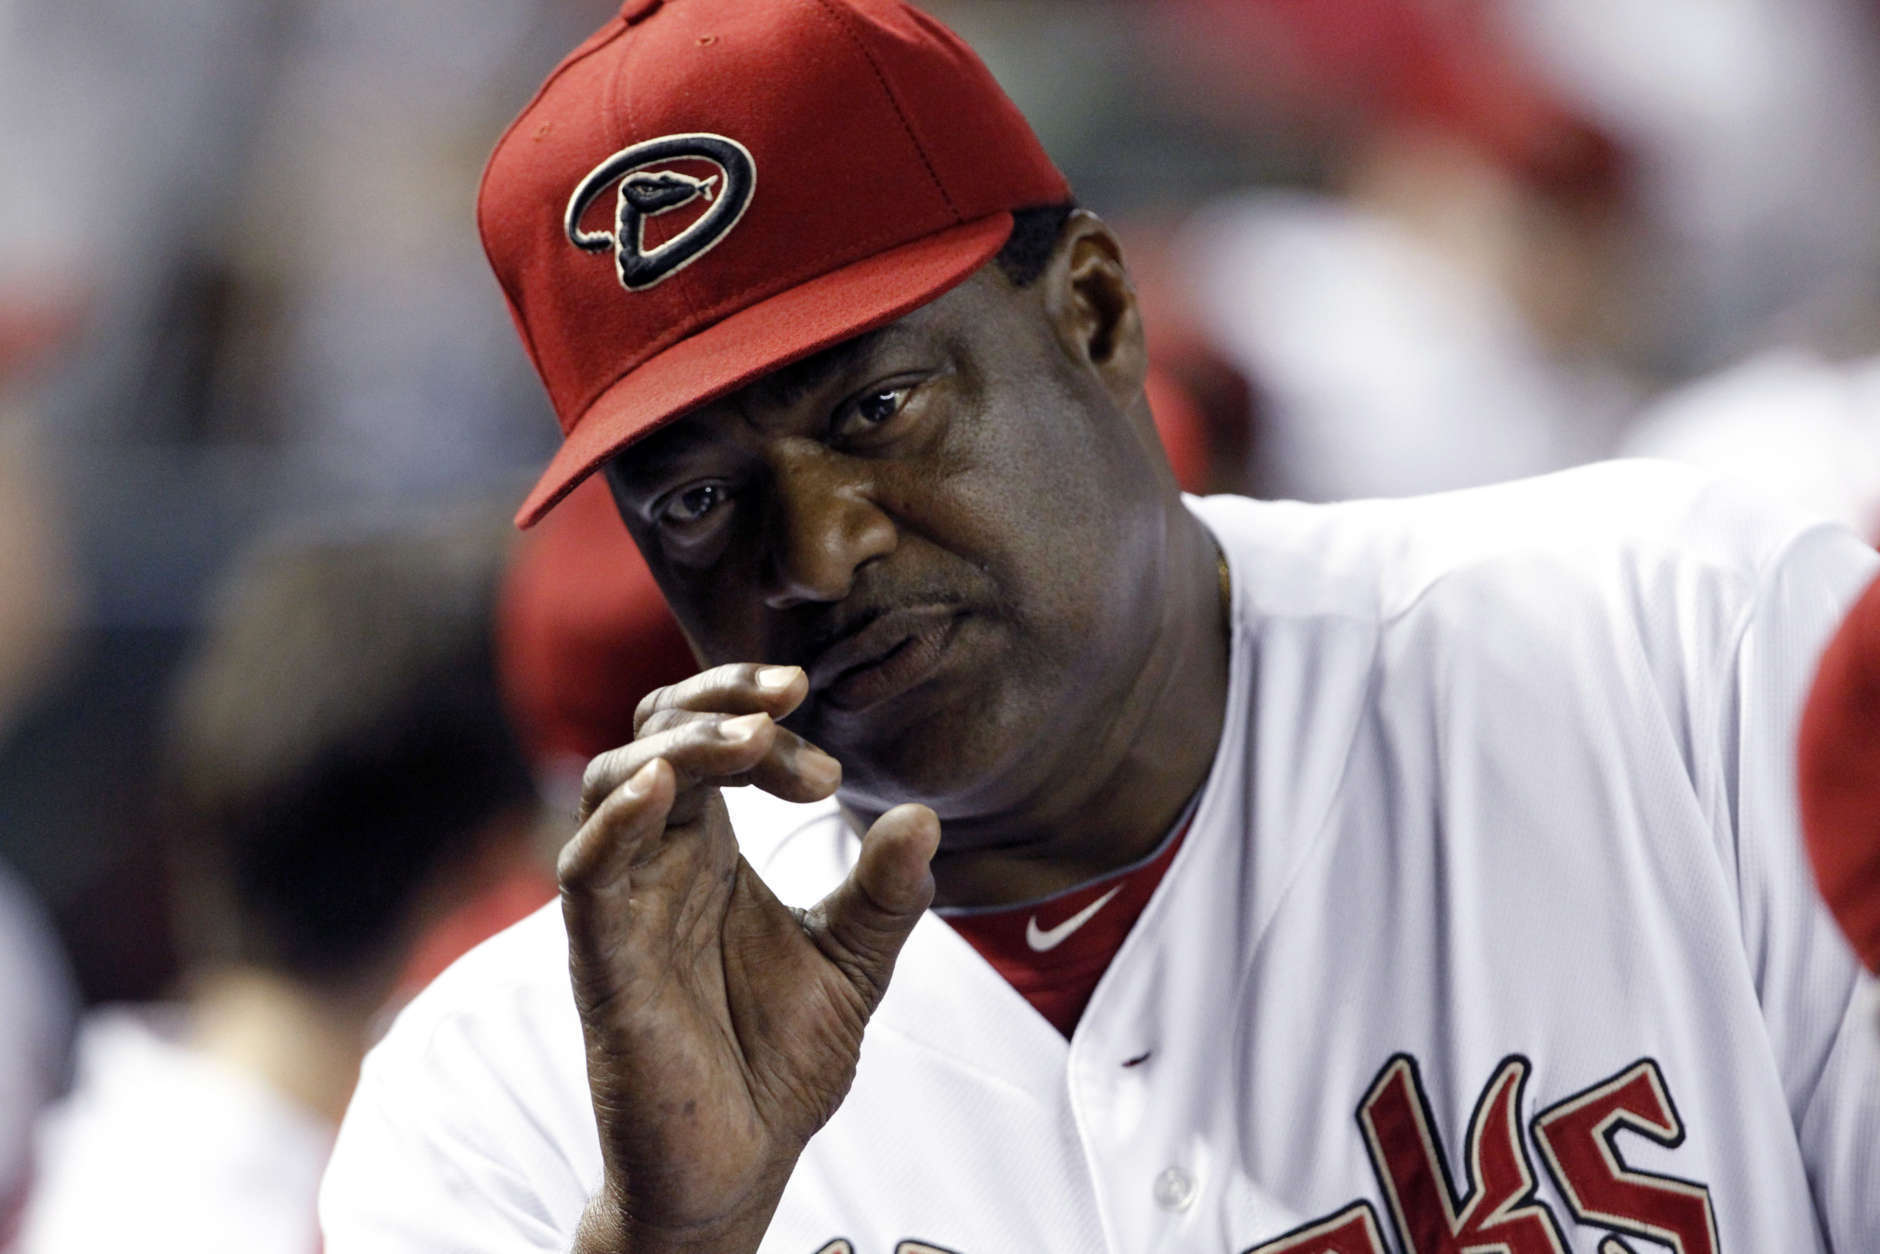 Don Baylor, former major league baseball player, manager and coach, died Monday after a long battle with cancer. He was 68. In this Aug. 12, 2011, file photo, Arizona Diamondbacks' batting coach Don Baylor gestures during a baseball game against the New York Mets, in Phoenix. (AP Photo/Ross D. Franklin, File)